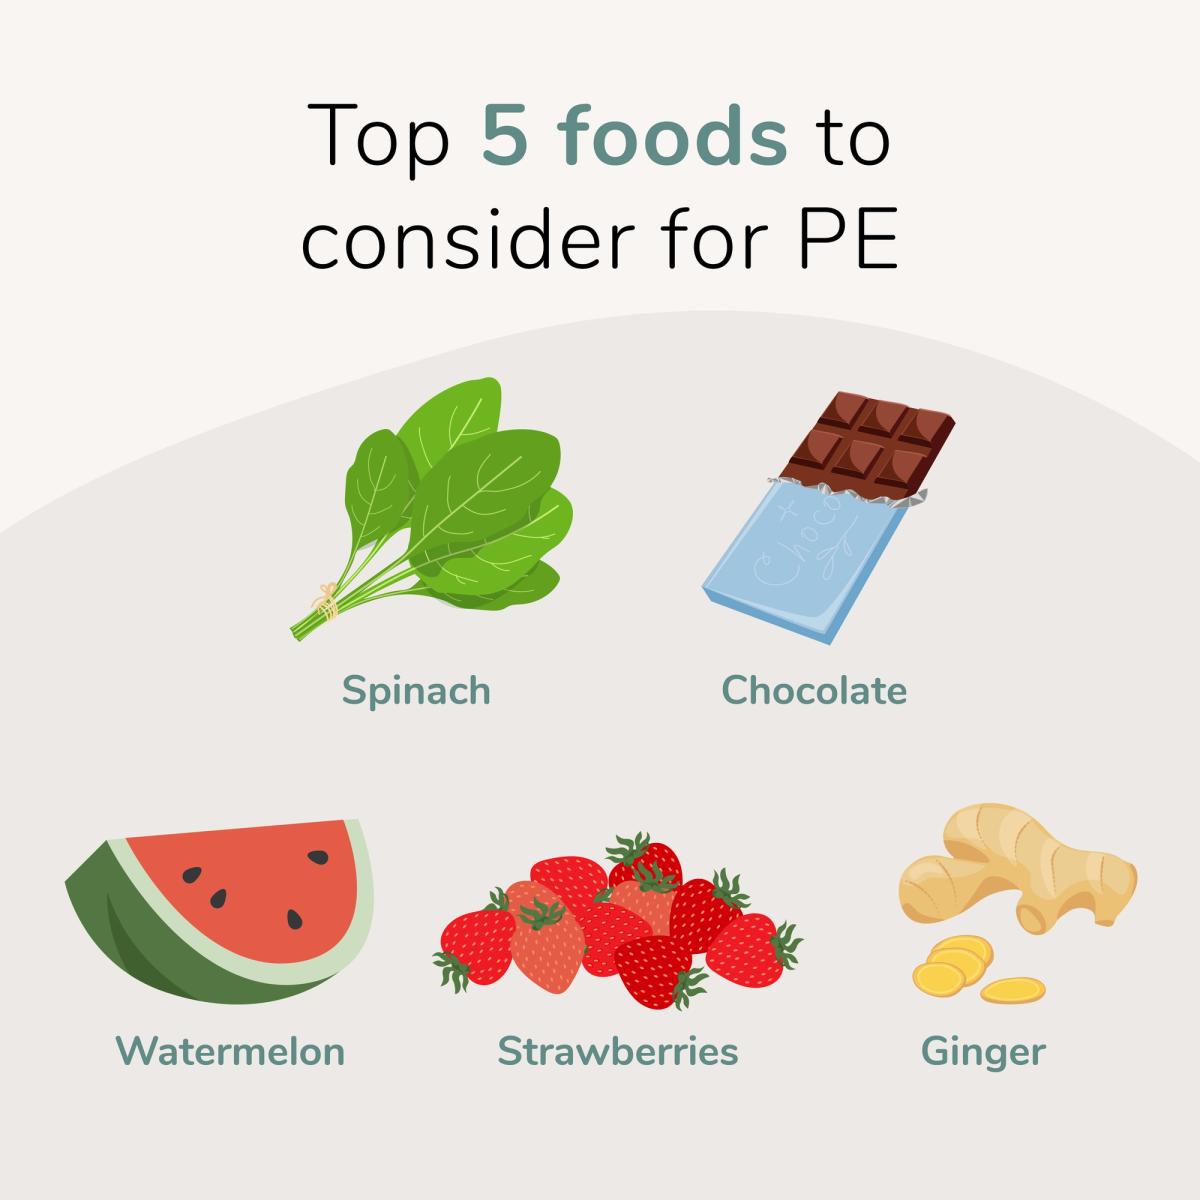 Illustration of the top 5 foods to consider for PE - spinach, chocolate, watermelon, strawberries, and ginger